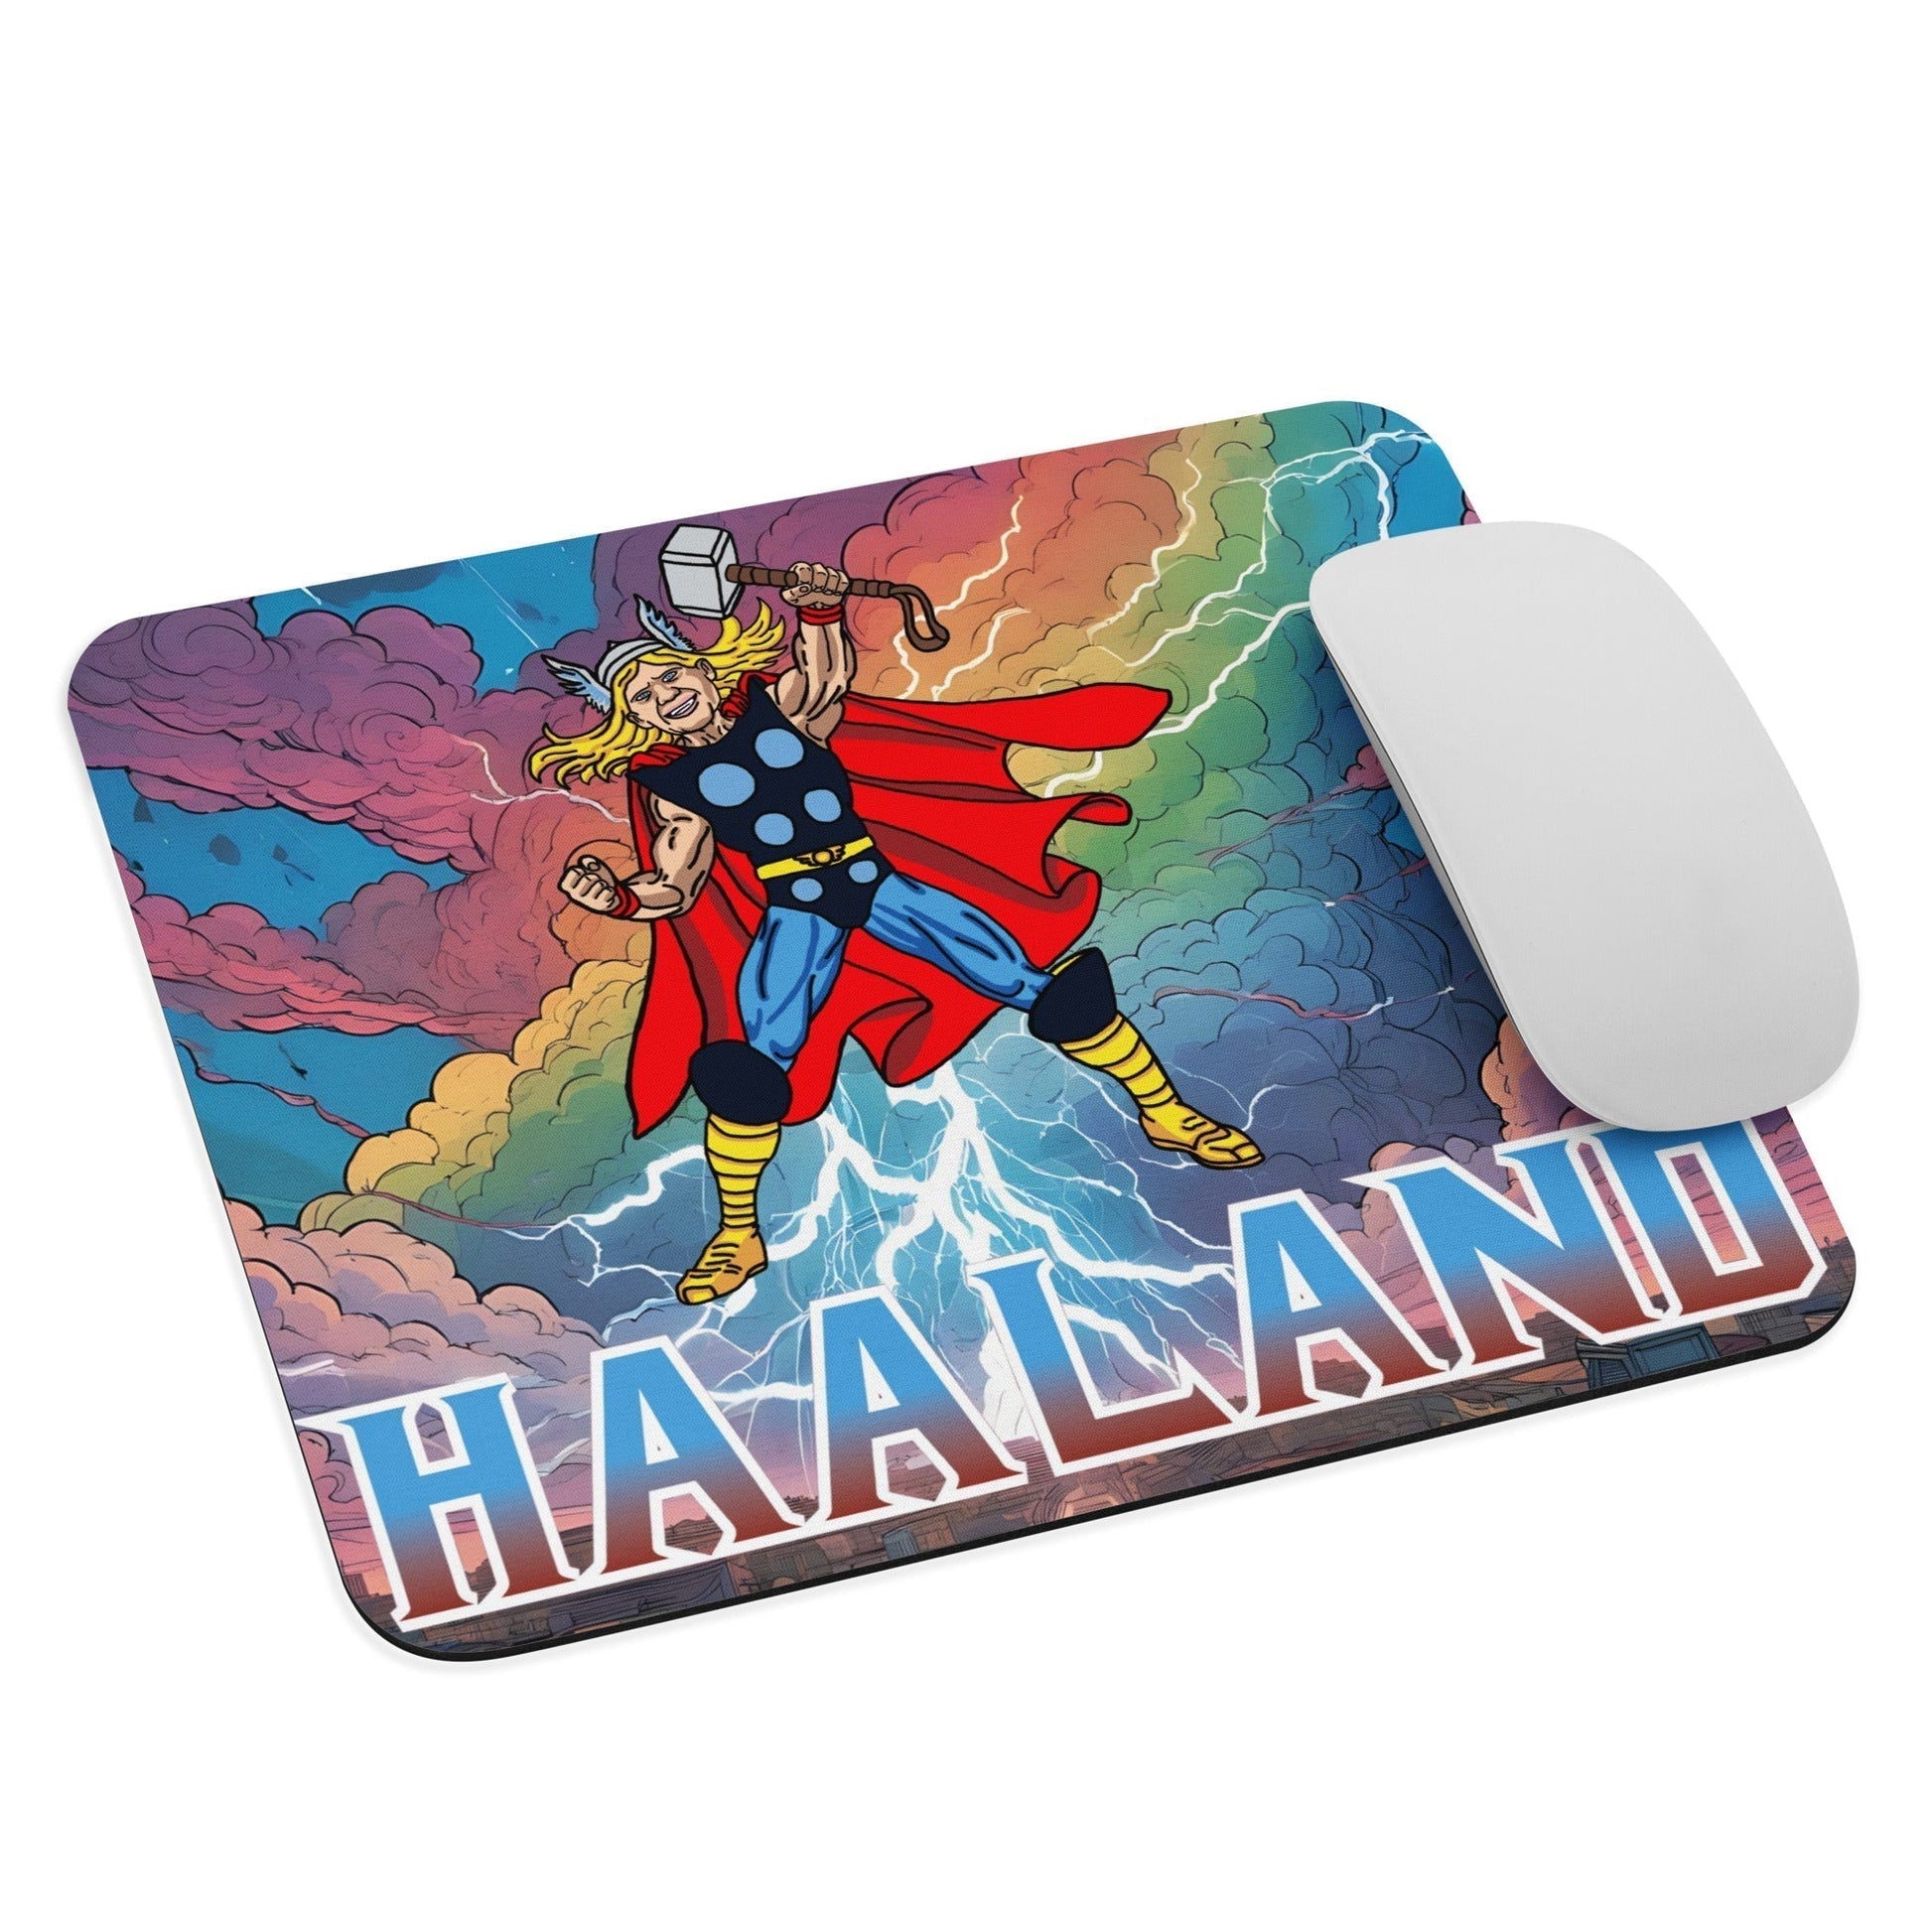 Erling Haaland Thor Avenger Manchester City Funny Football/ Soccer Meme Mouse pad Next Cult Brand Erling Haaland, Football, Manchester City, Thor